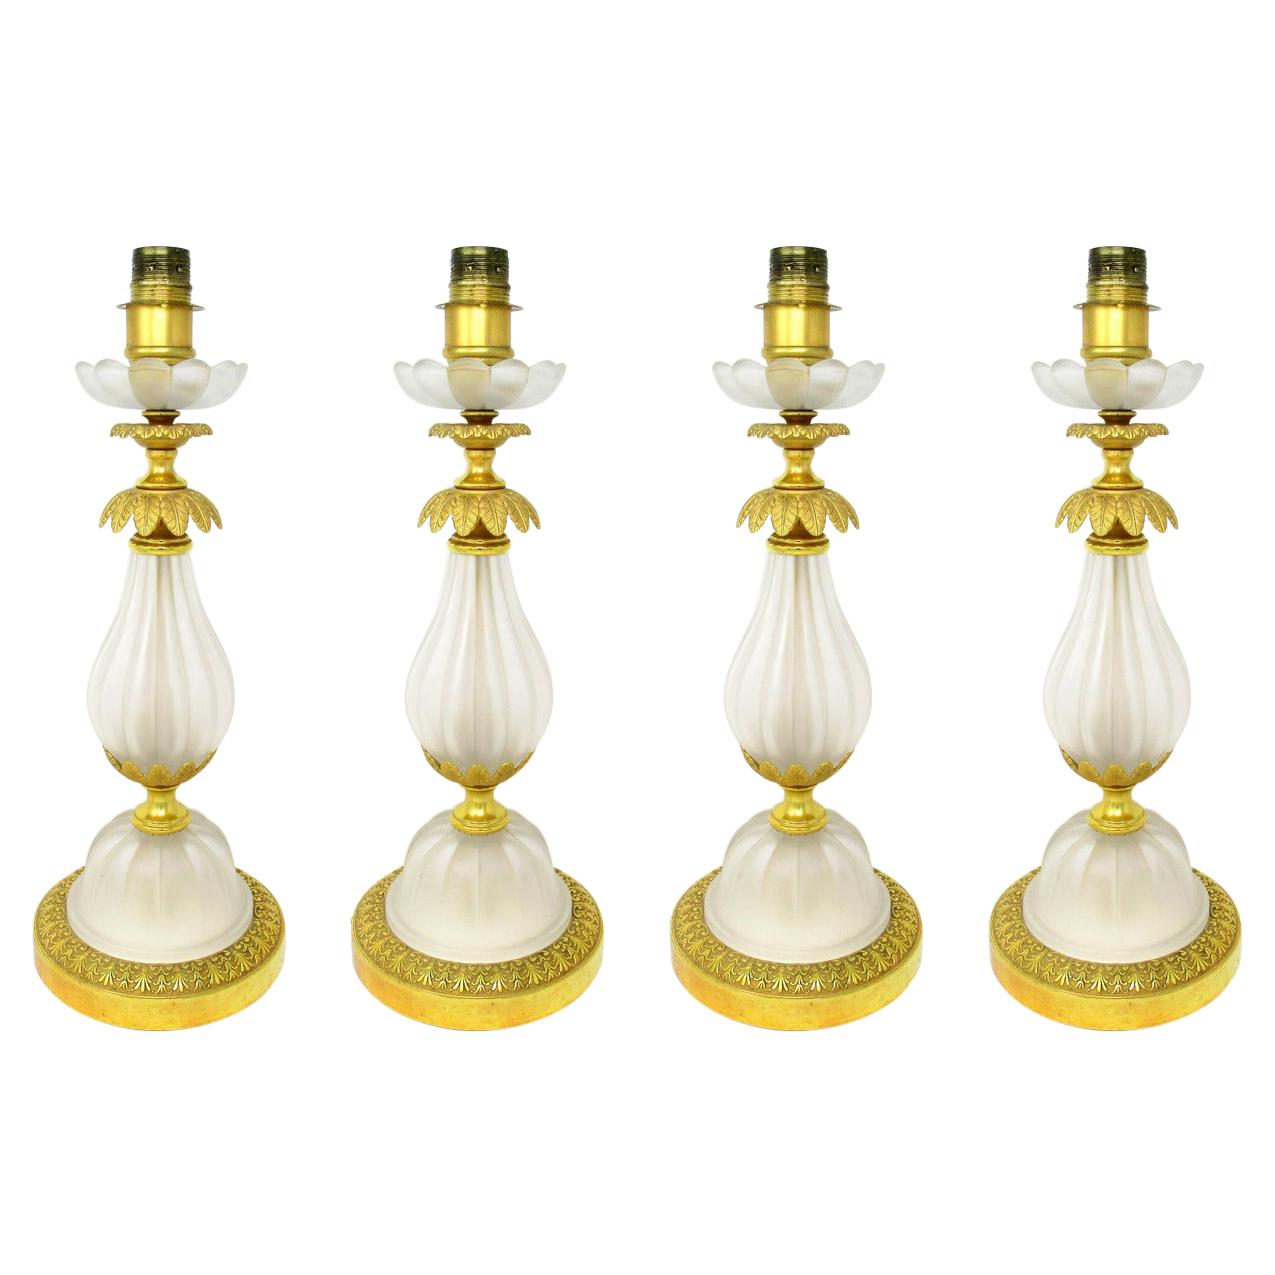 Set of Four Italian Murano Glass Table Lamps Mid-Century Modern Barovier Toso